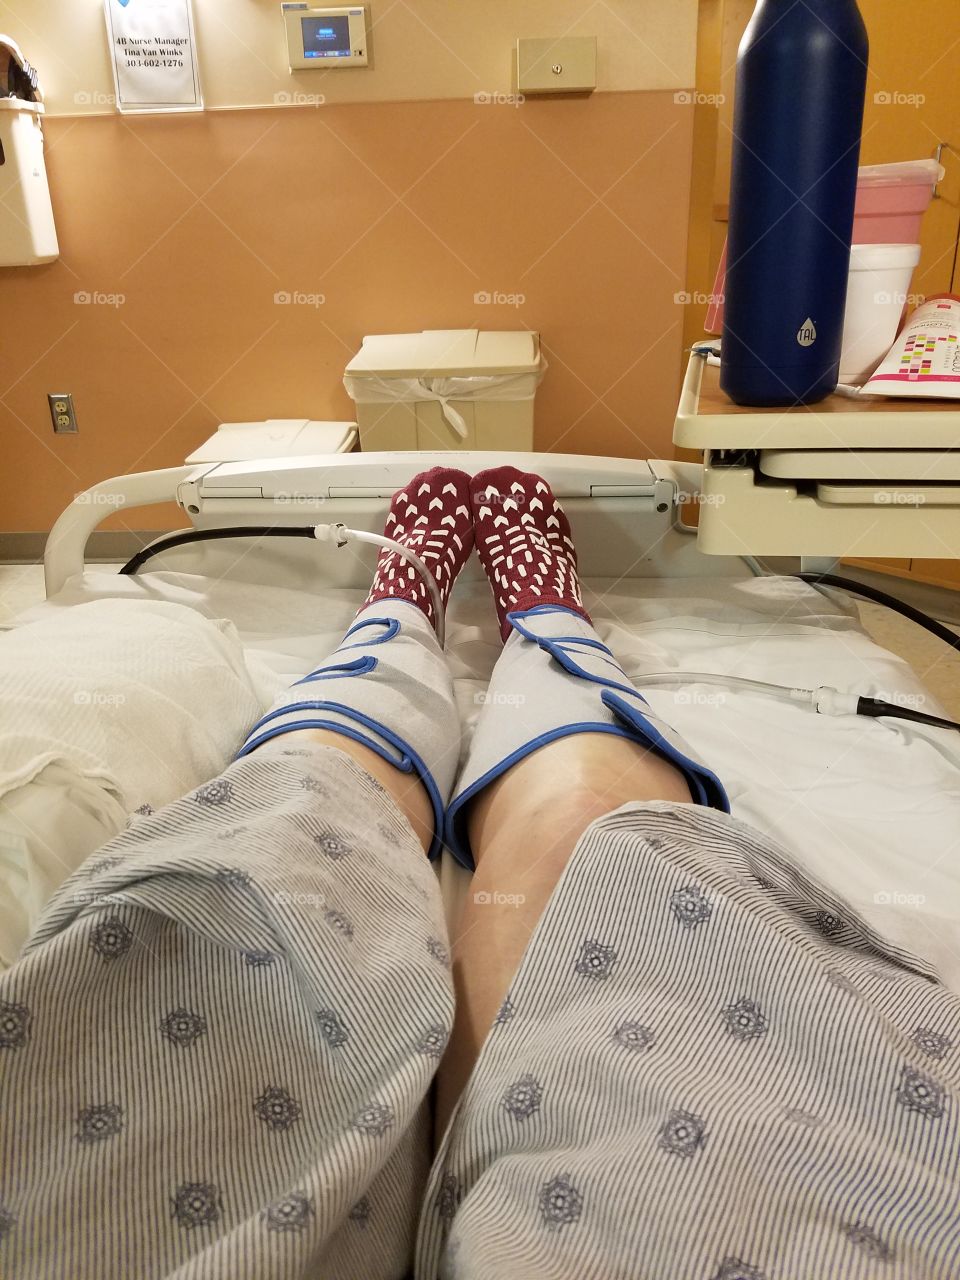 Legs, post surgery, laying in a hospital bed with pressure cuffs that are designed to keep you from getting blood clots.